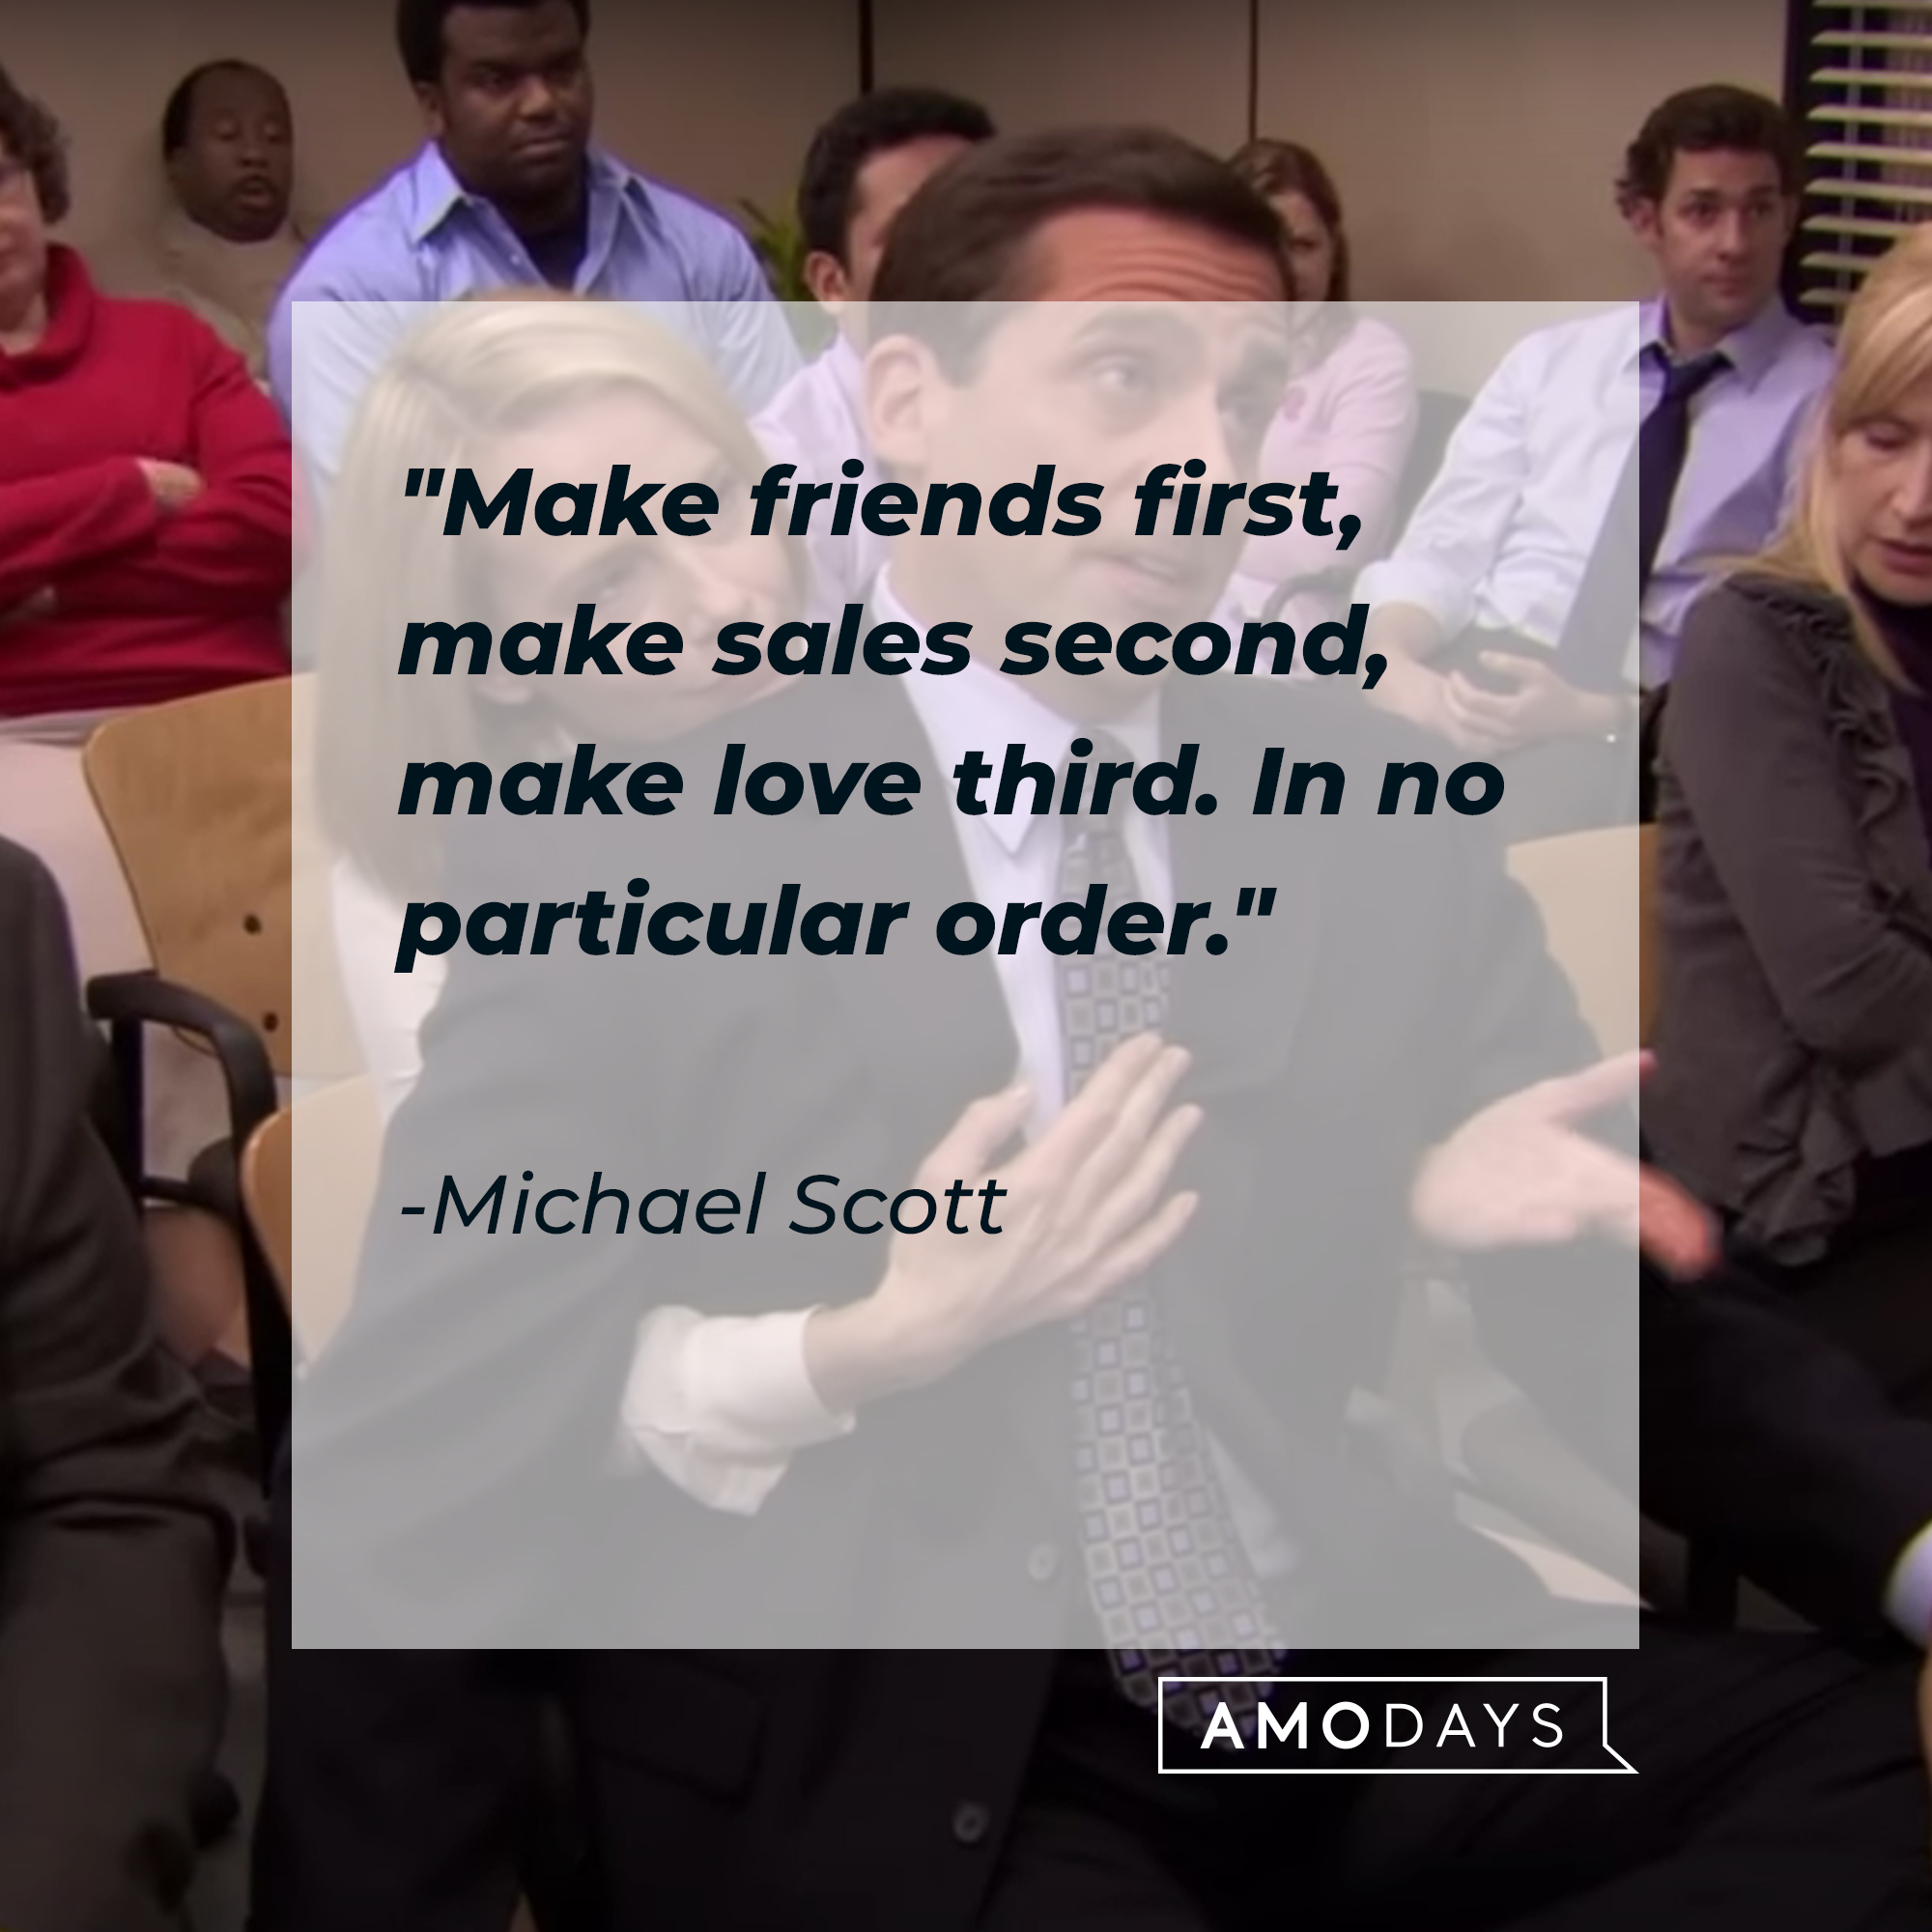 Michael Scott's quote: "Make friends first, make sales second, make love third. In no particular order." | Source: YouTube/TheOffice